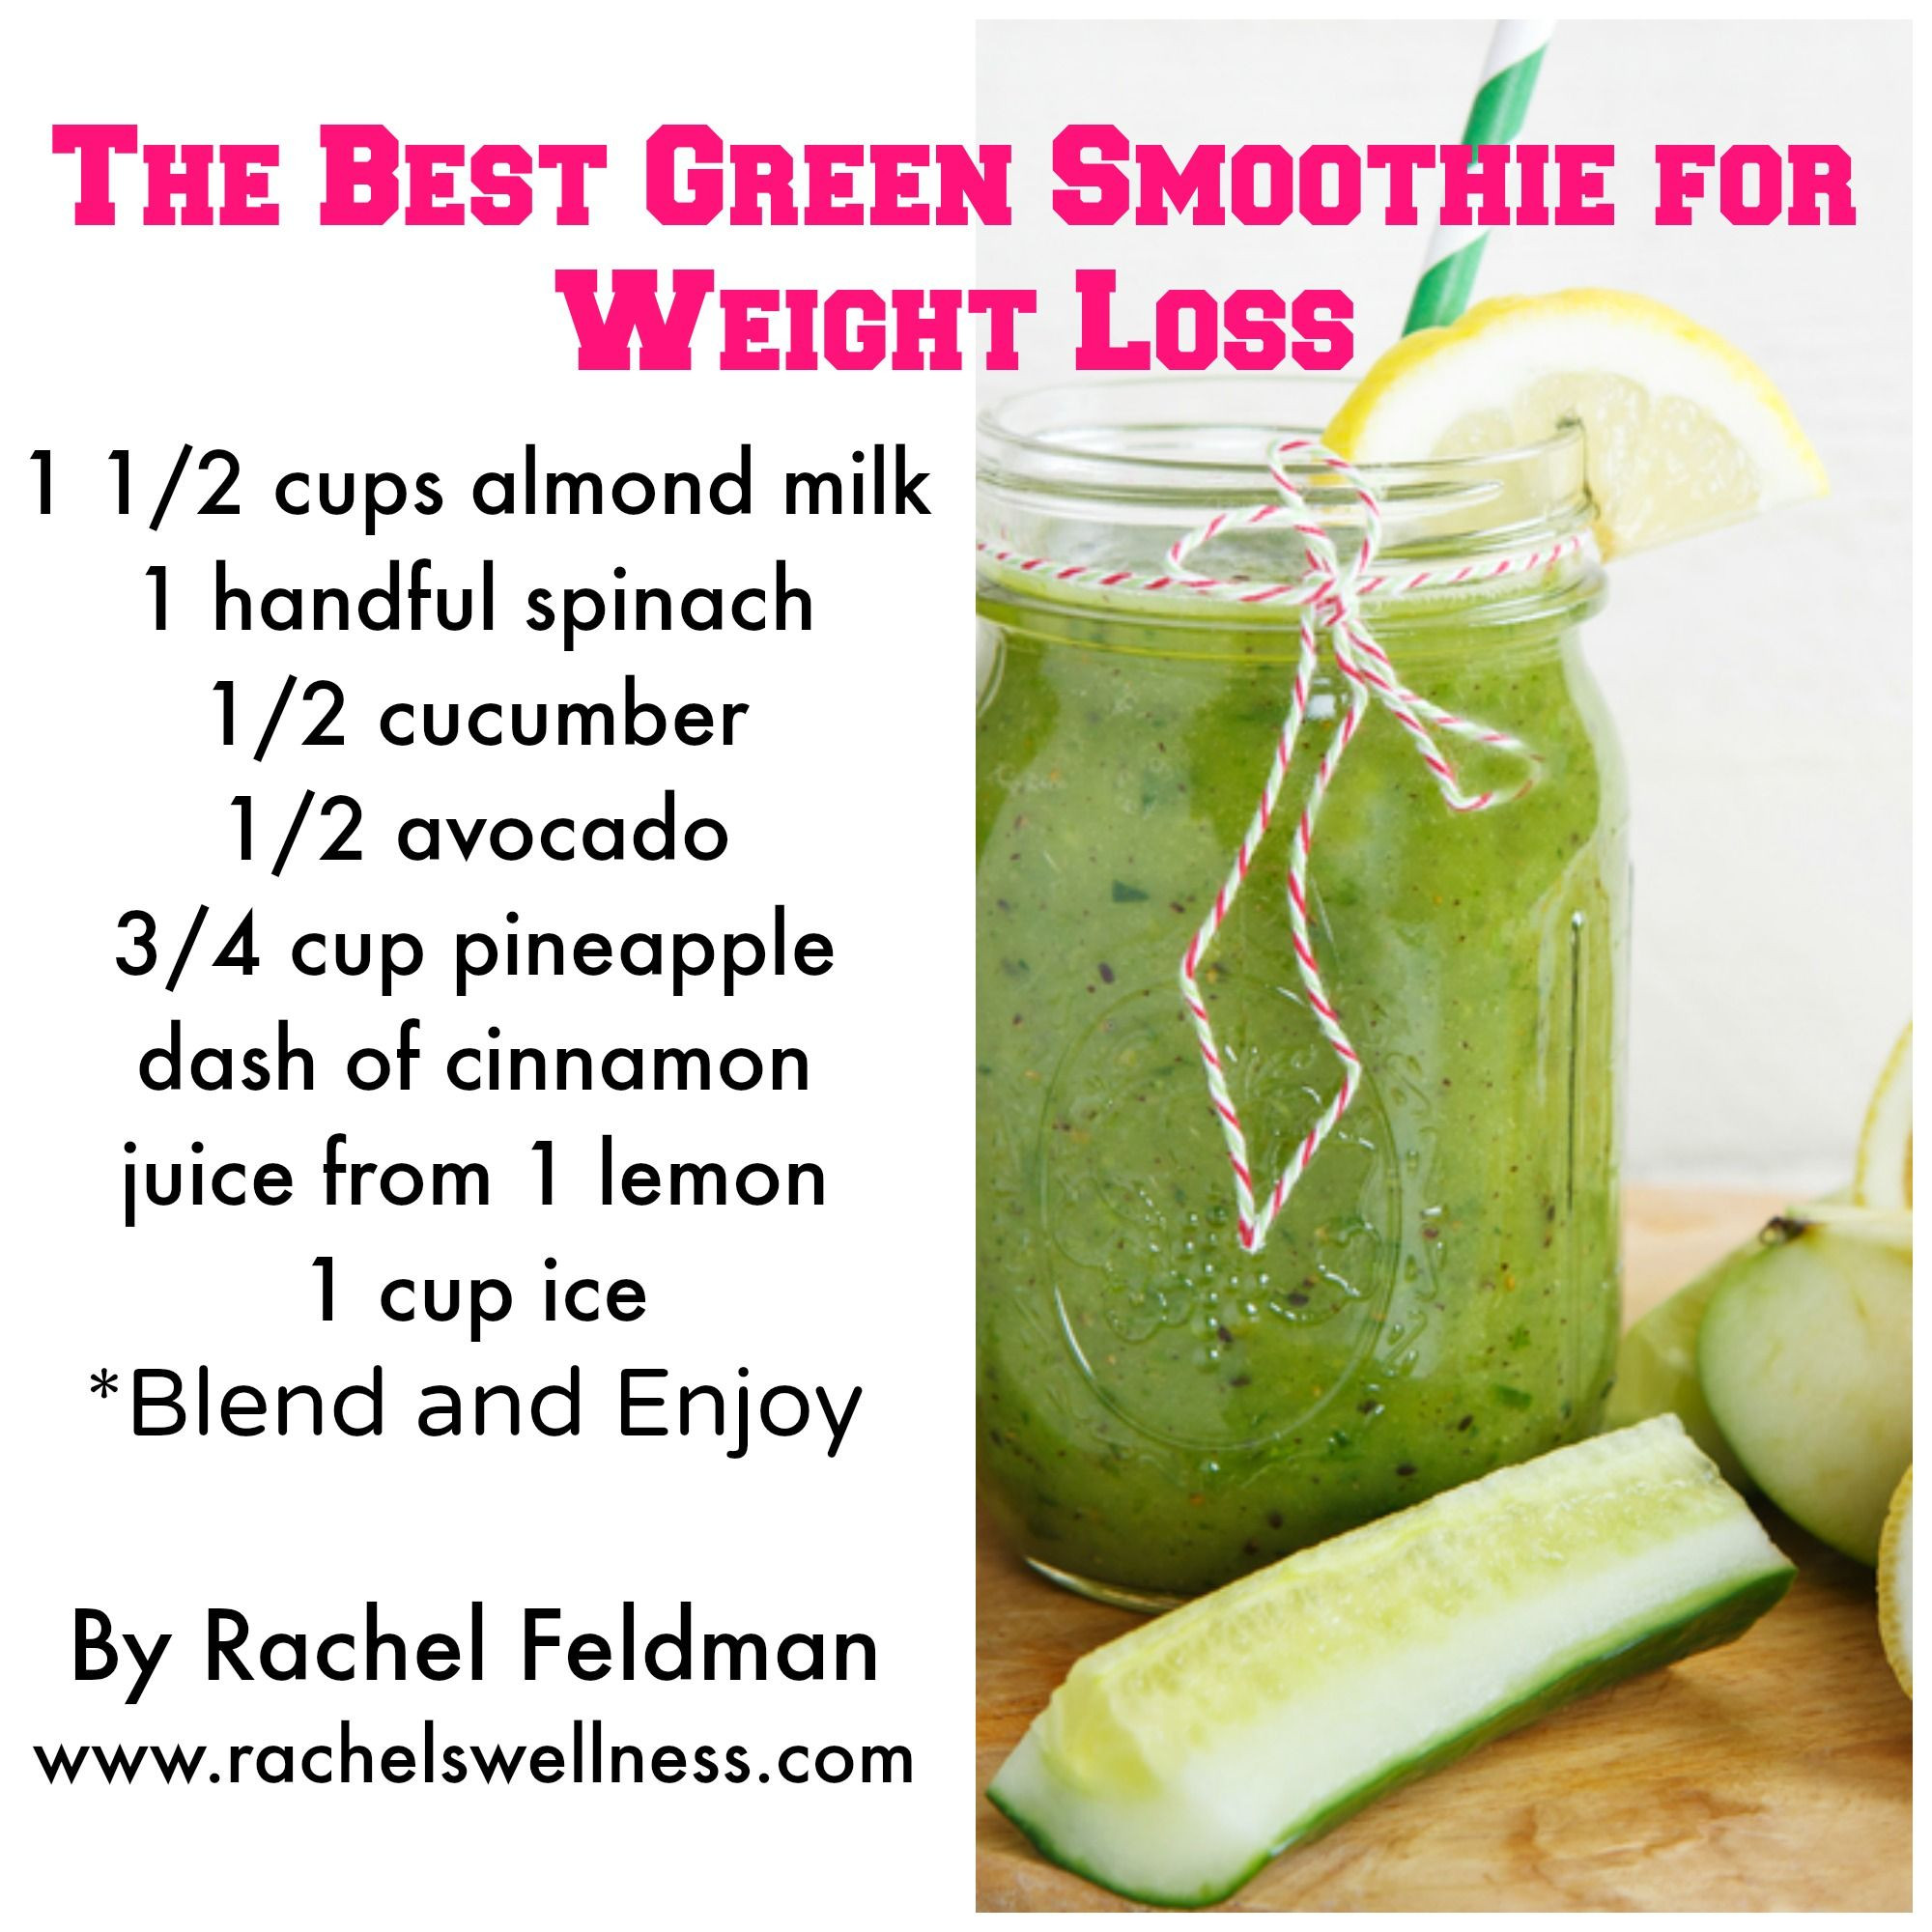 Healthy Shake Recipes For Weight Loss
 7 Healthy Green Smoothie Recipes For Weight Loss